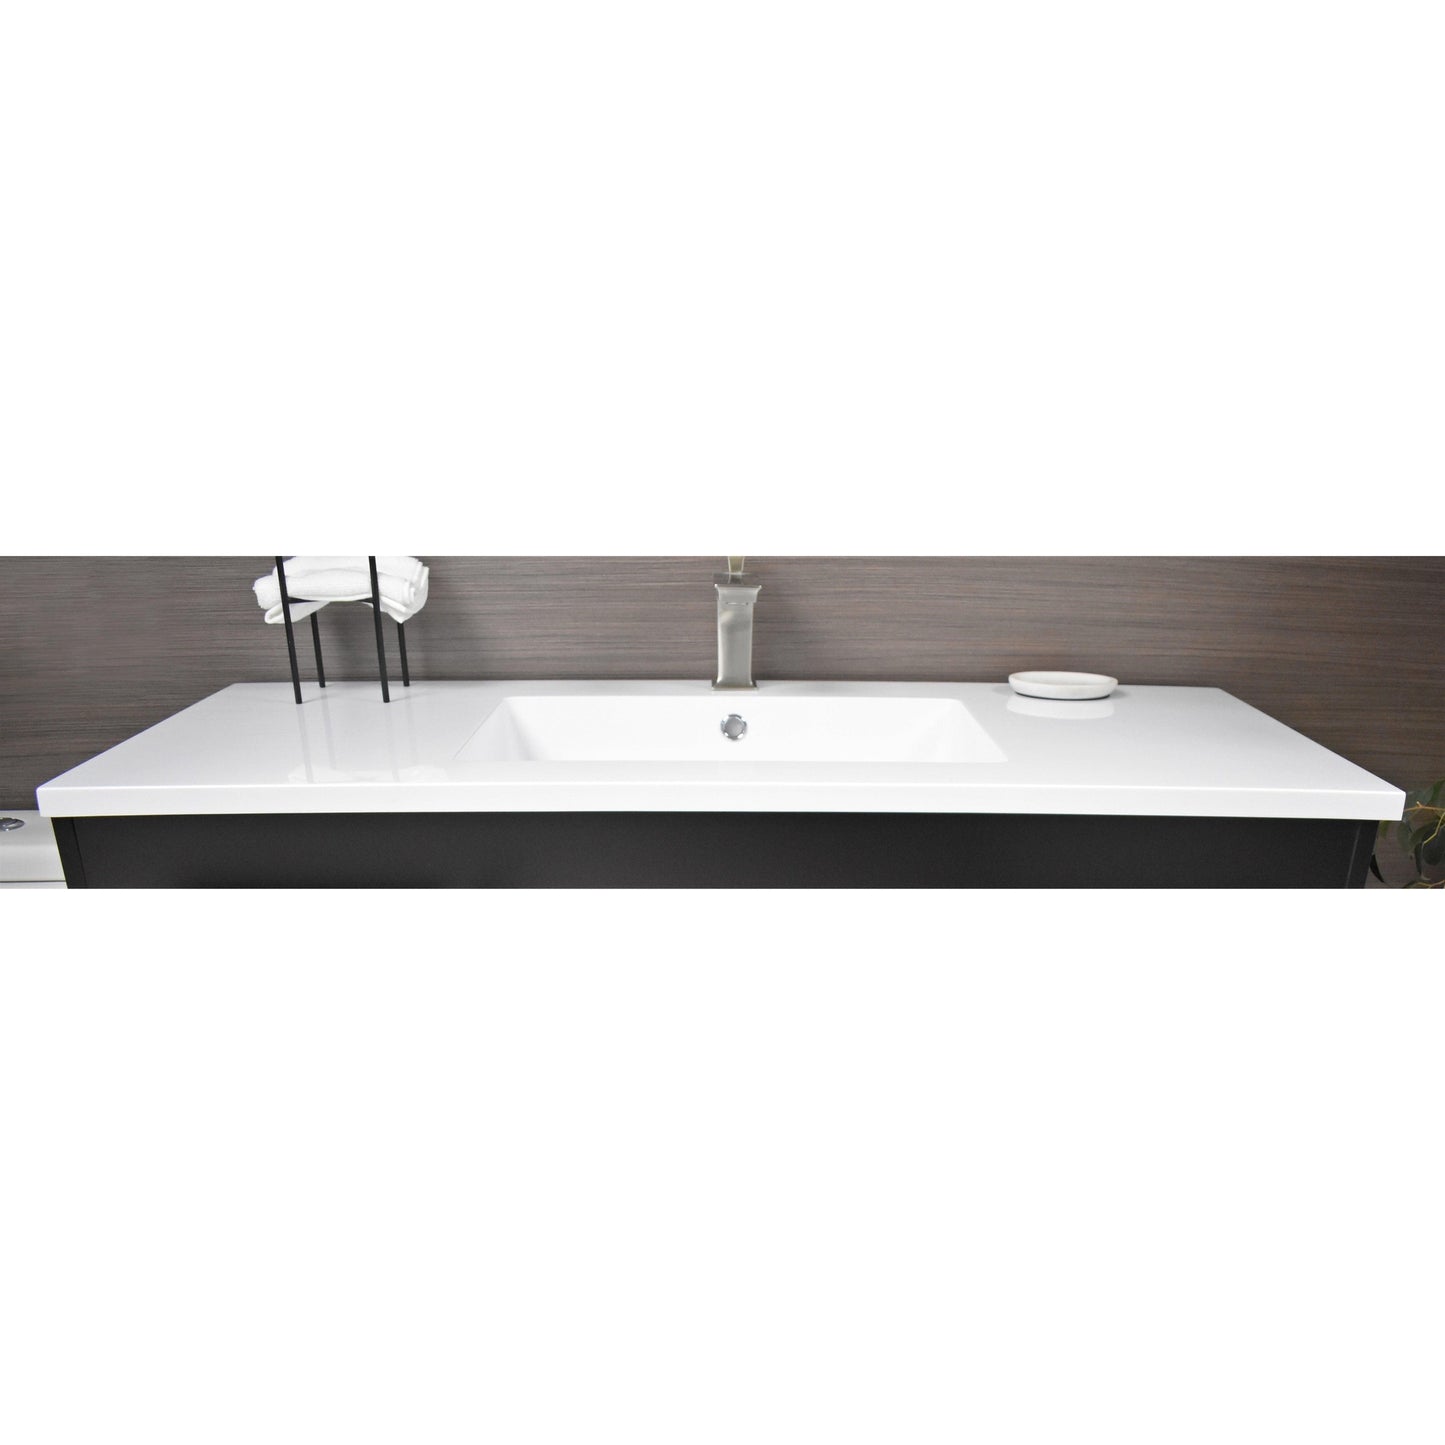 Volpa USA Rio 60" Black Freestanding Modern Bathroom Vanity With Integrated Acrylic Single Sink Top and Brushed Nickel Handles